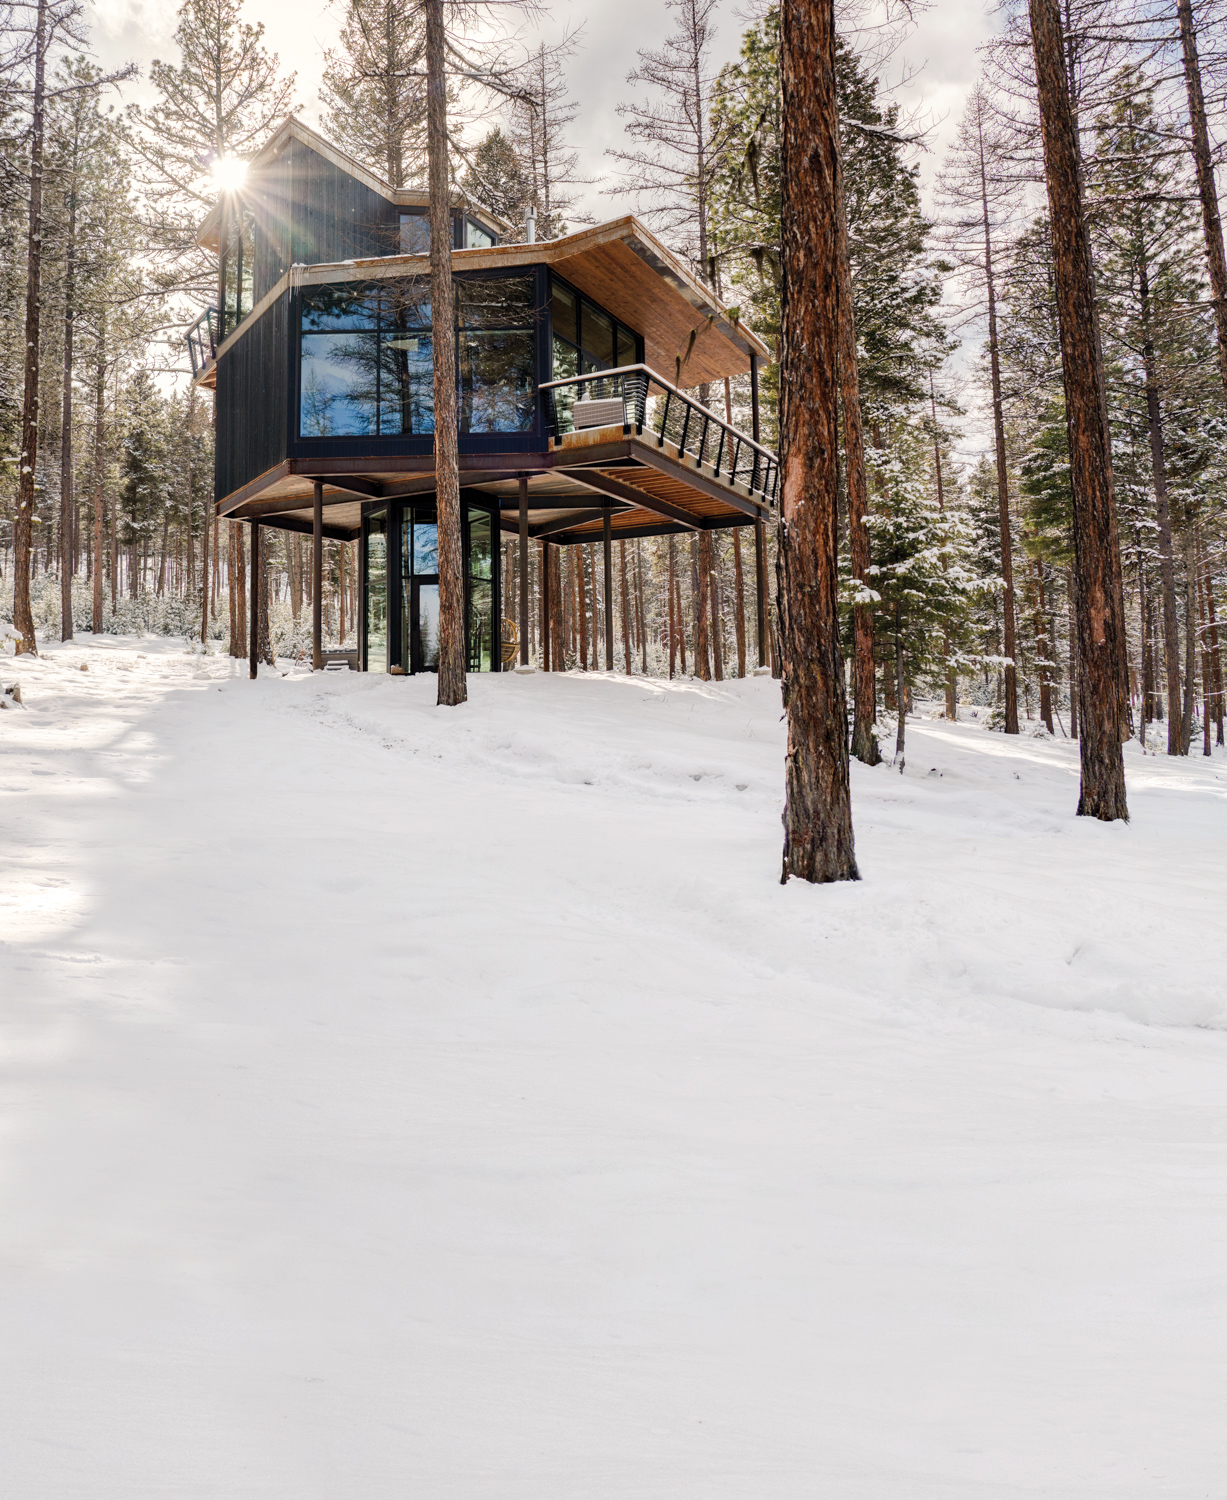 This Luxury Montana Retreat Offers Wellness Immersion Among The Trees